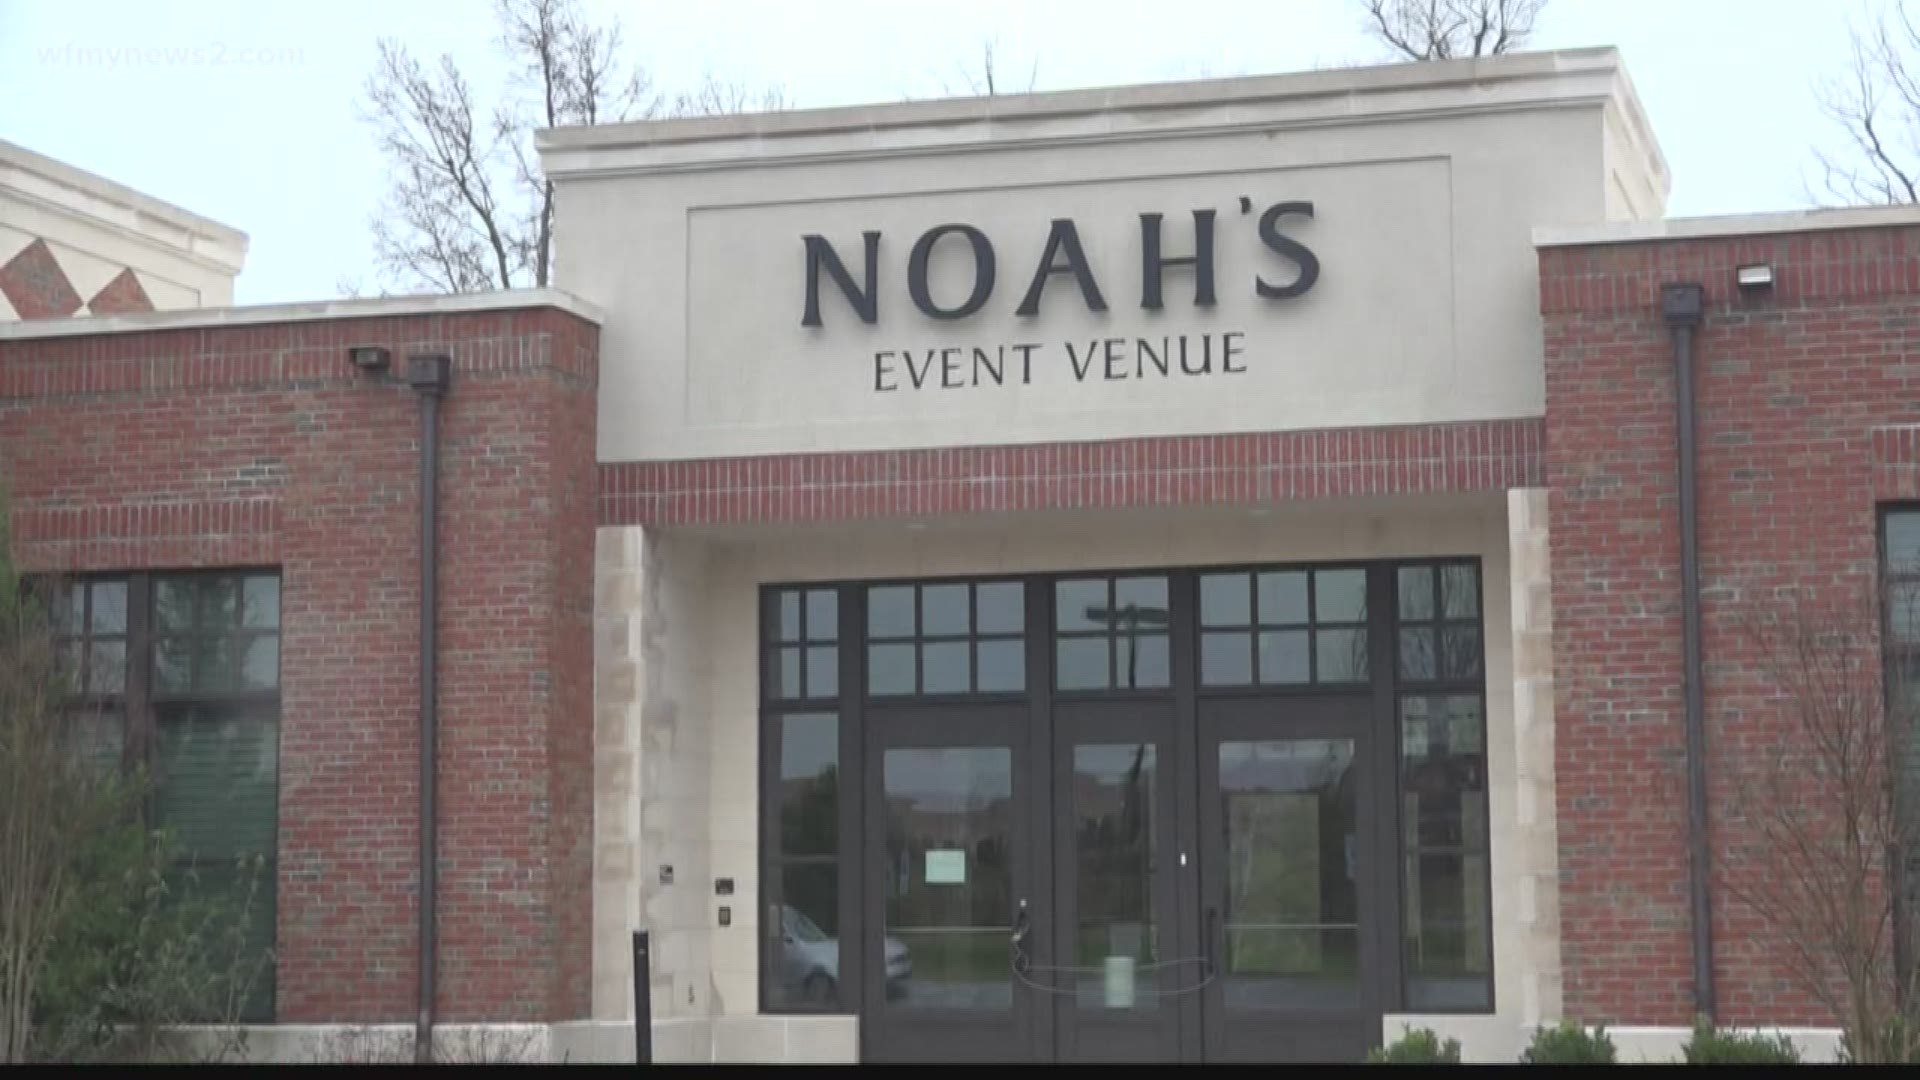 The venue filed for bankruptcy last year but closed suddenly. Now business leaders are helping scrambling couples.